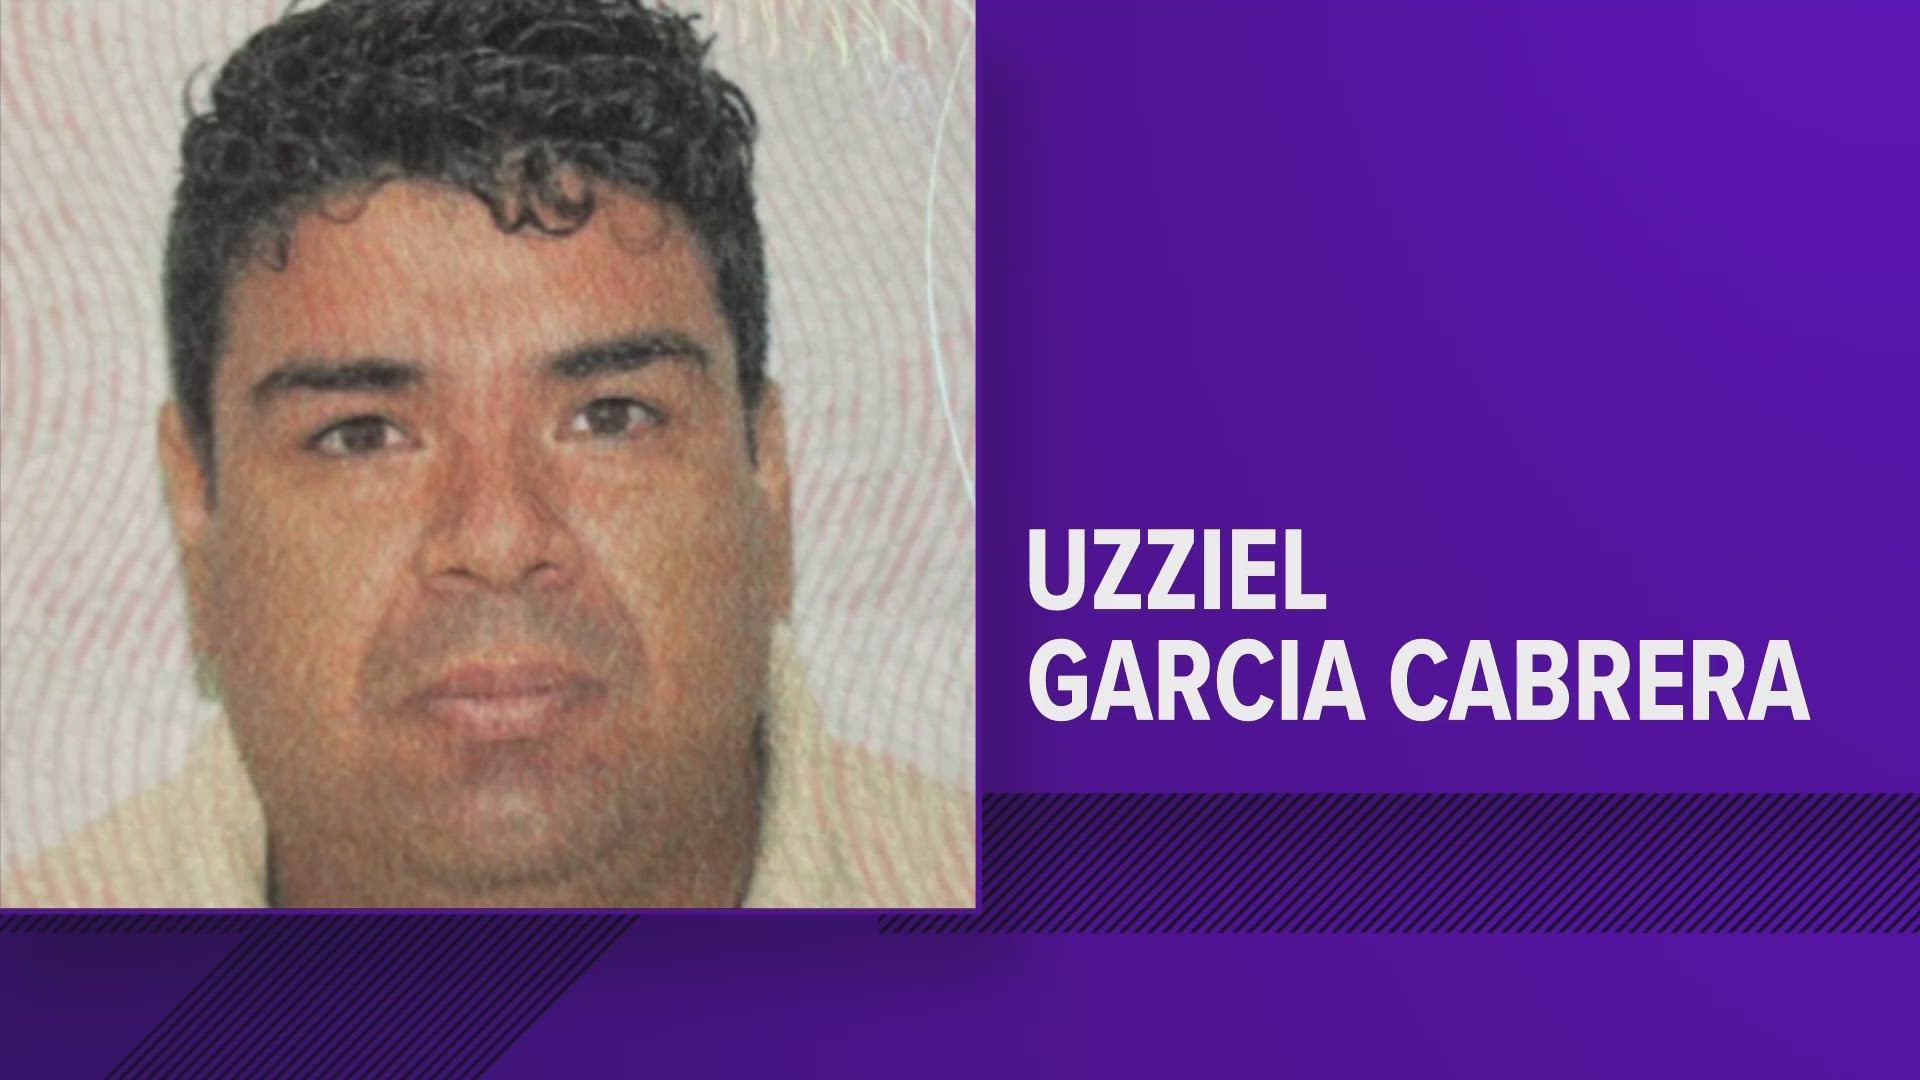 Police are searching for 36-year-old Uzziel Eduardo Garcia Cabrera for an incident that occurred at the Sofia Apartments on Willow Creek Drive on April 2.